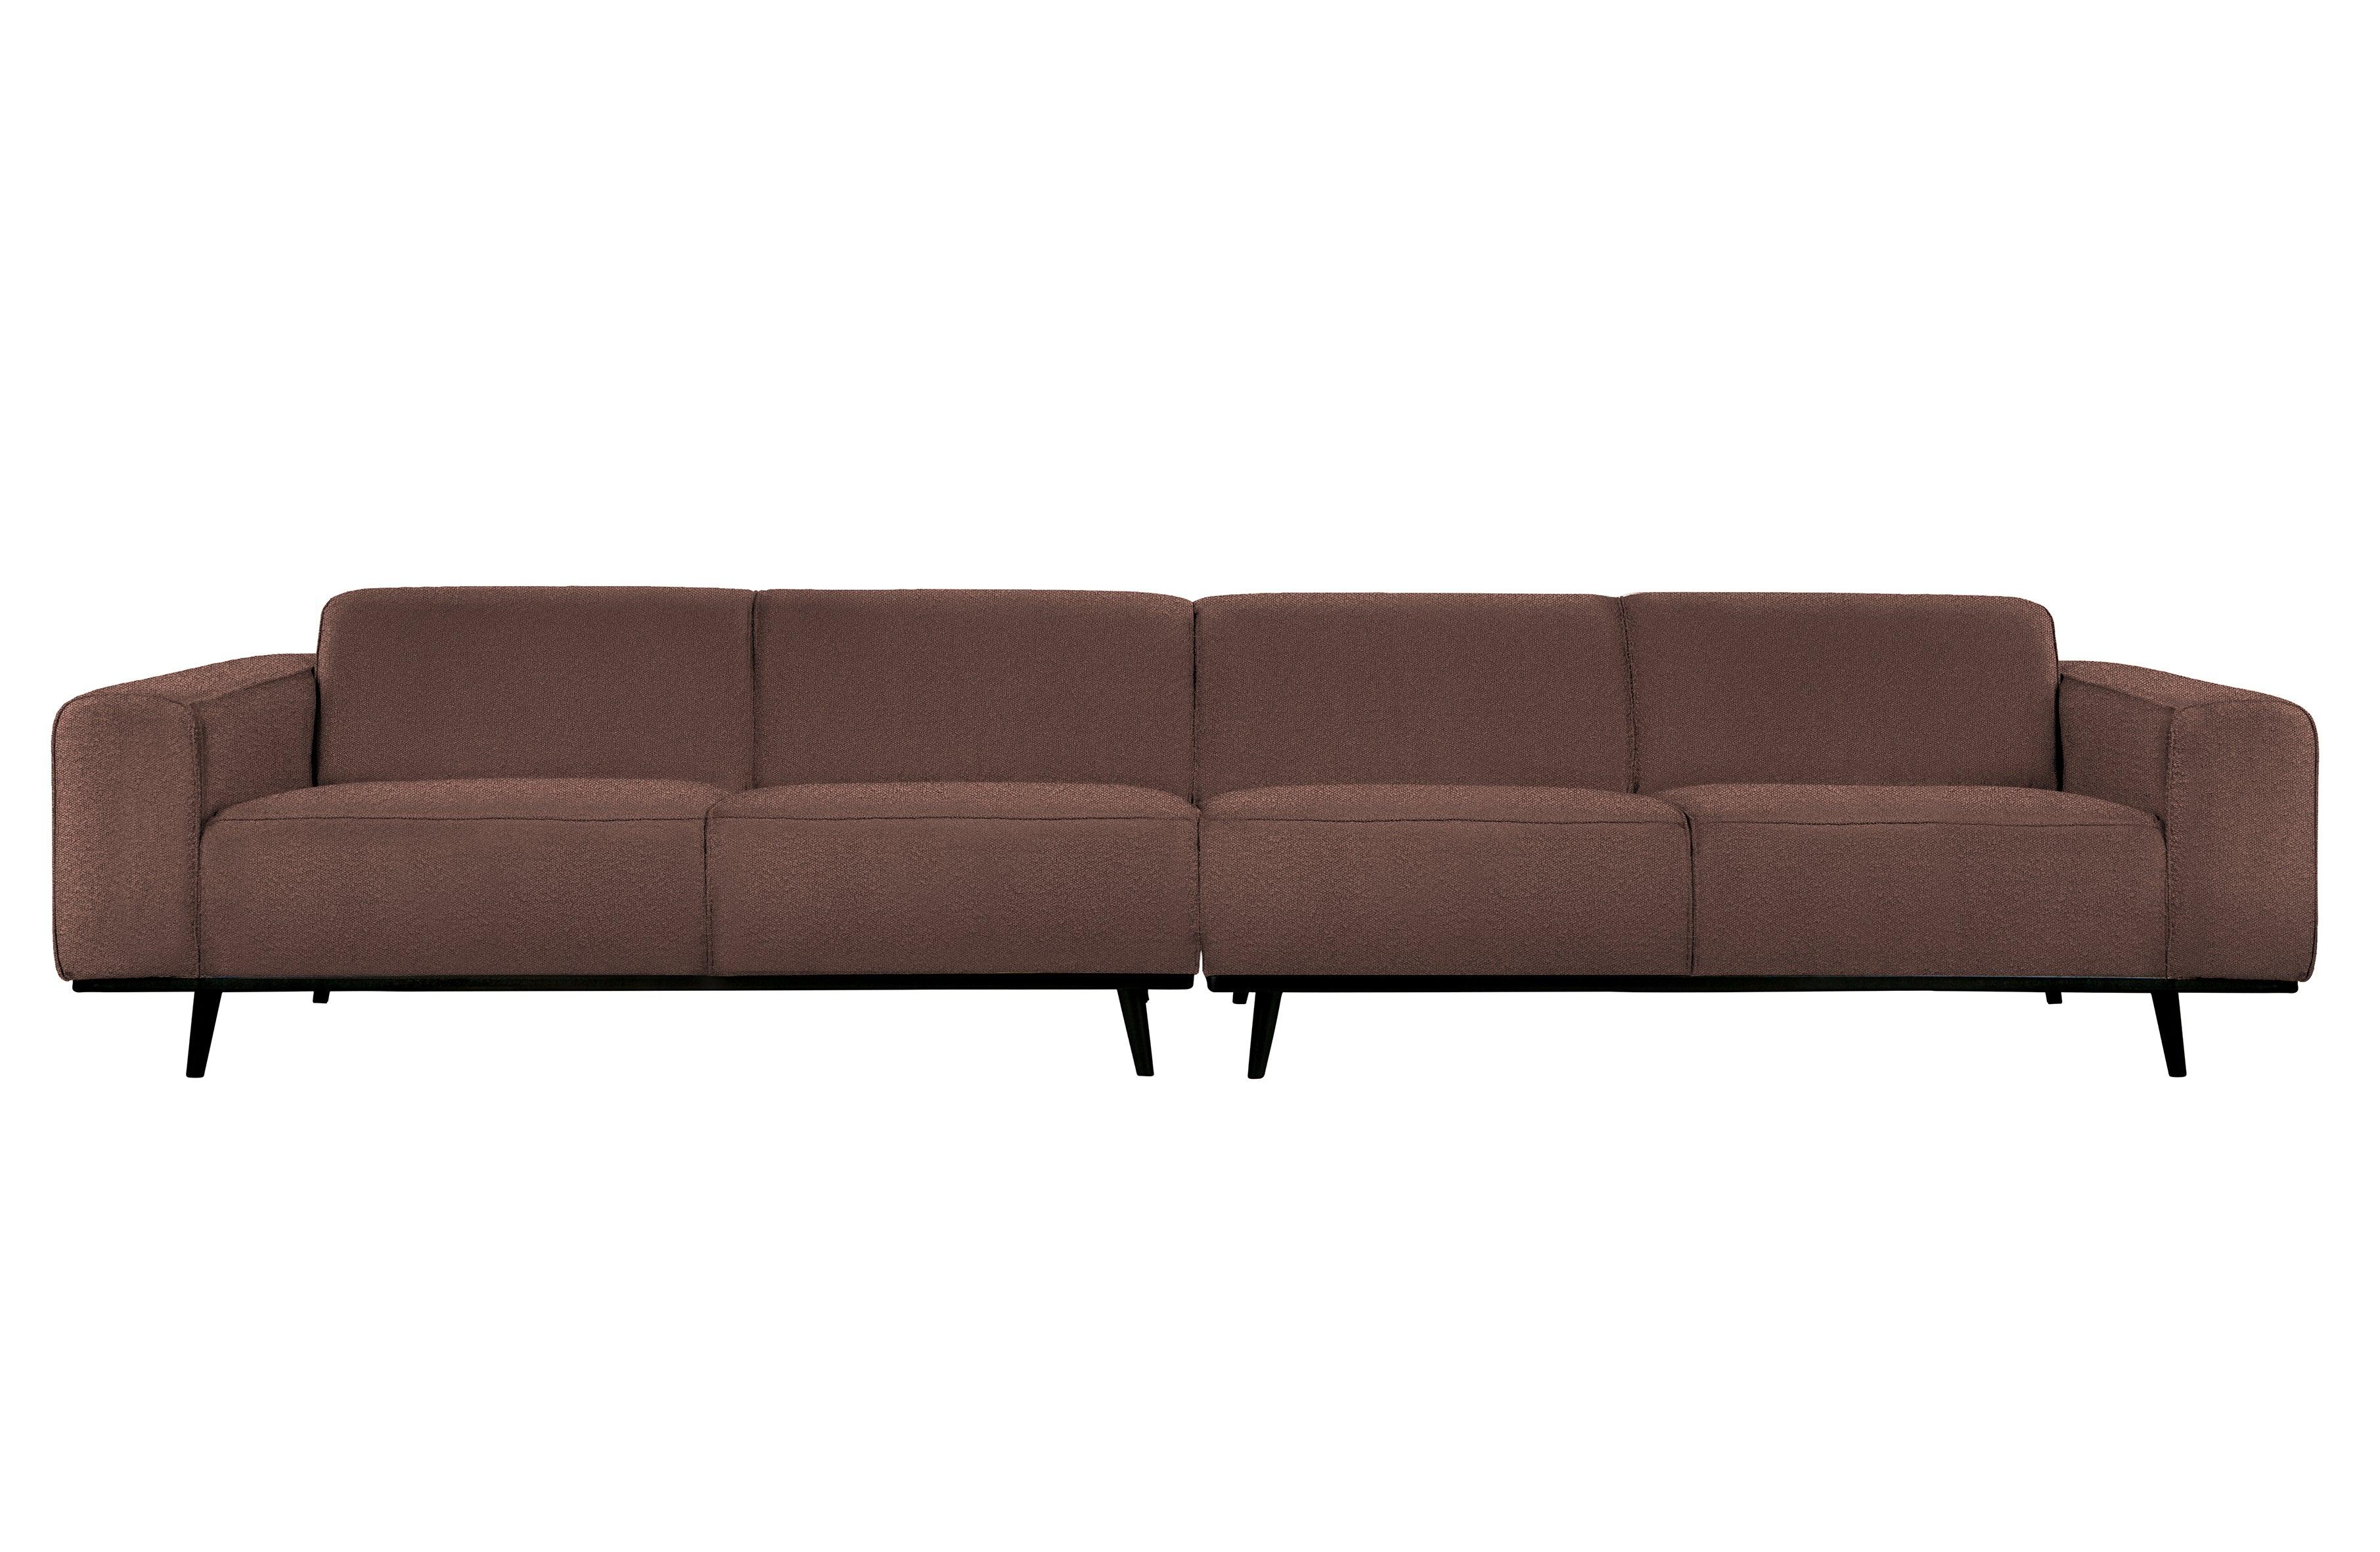 Sofa 4-osobowa STATEMENT boucle brązowy Be Pure 372 cm   Eye on Design